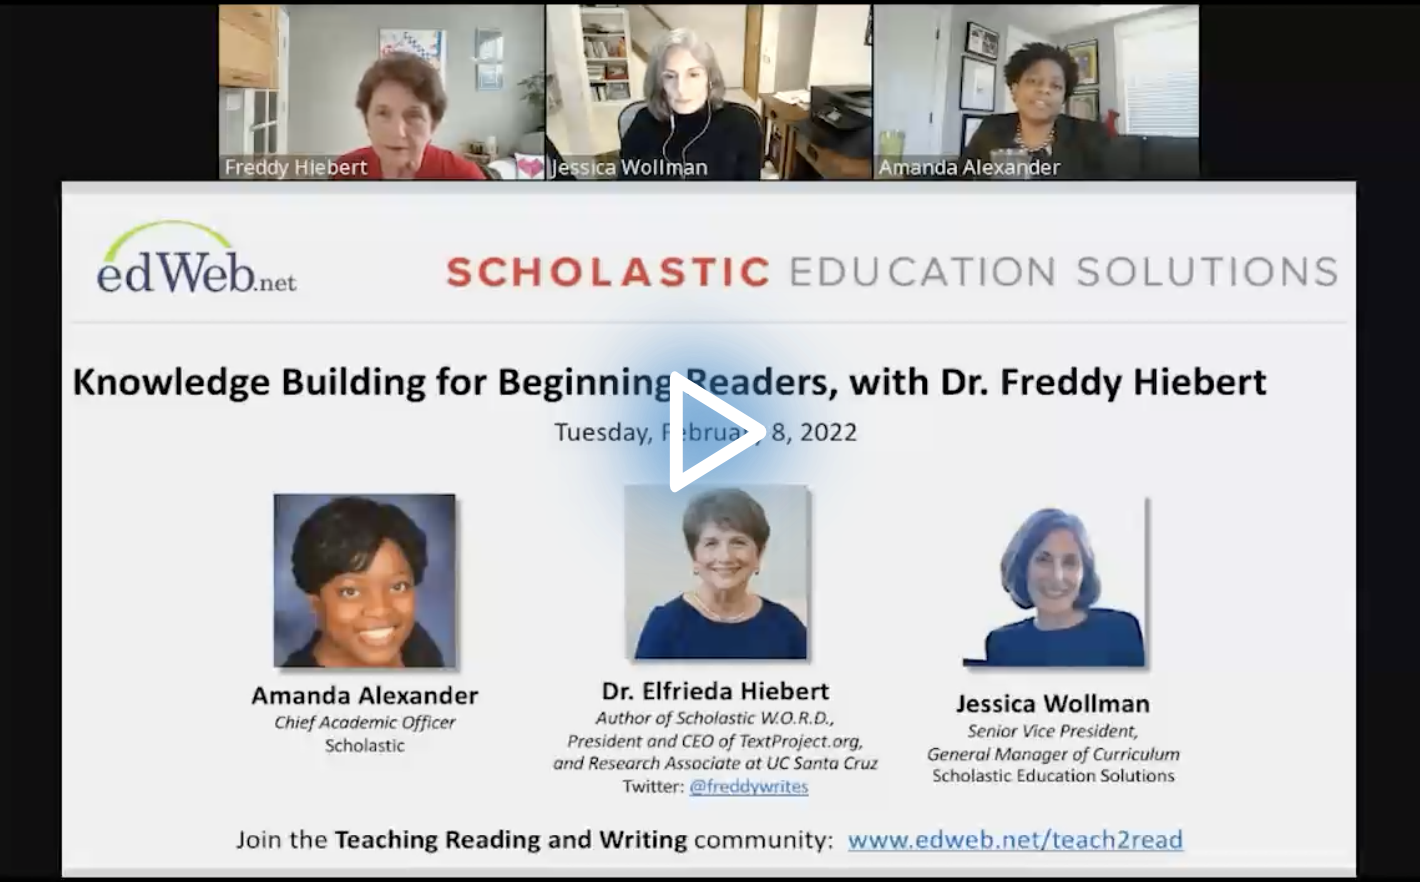 Knowledge Building for Beginning Readers, with Dr. Freddy Hiebert edLeader Panel recording link